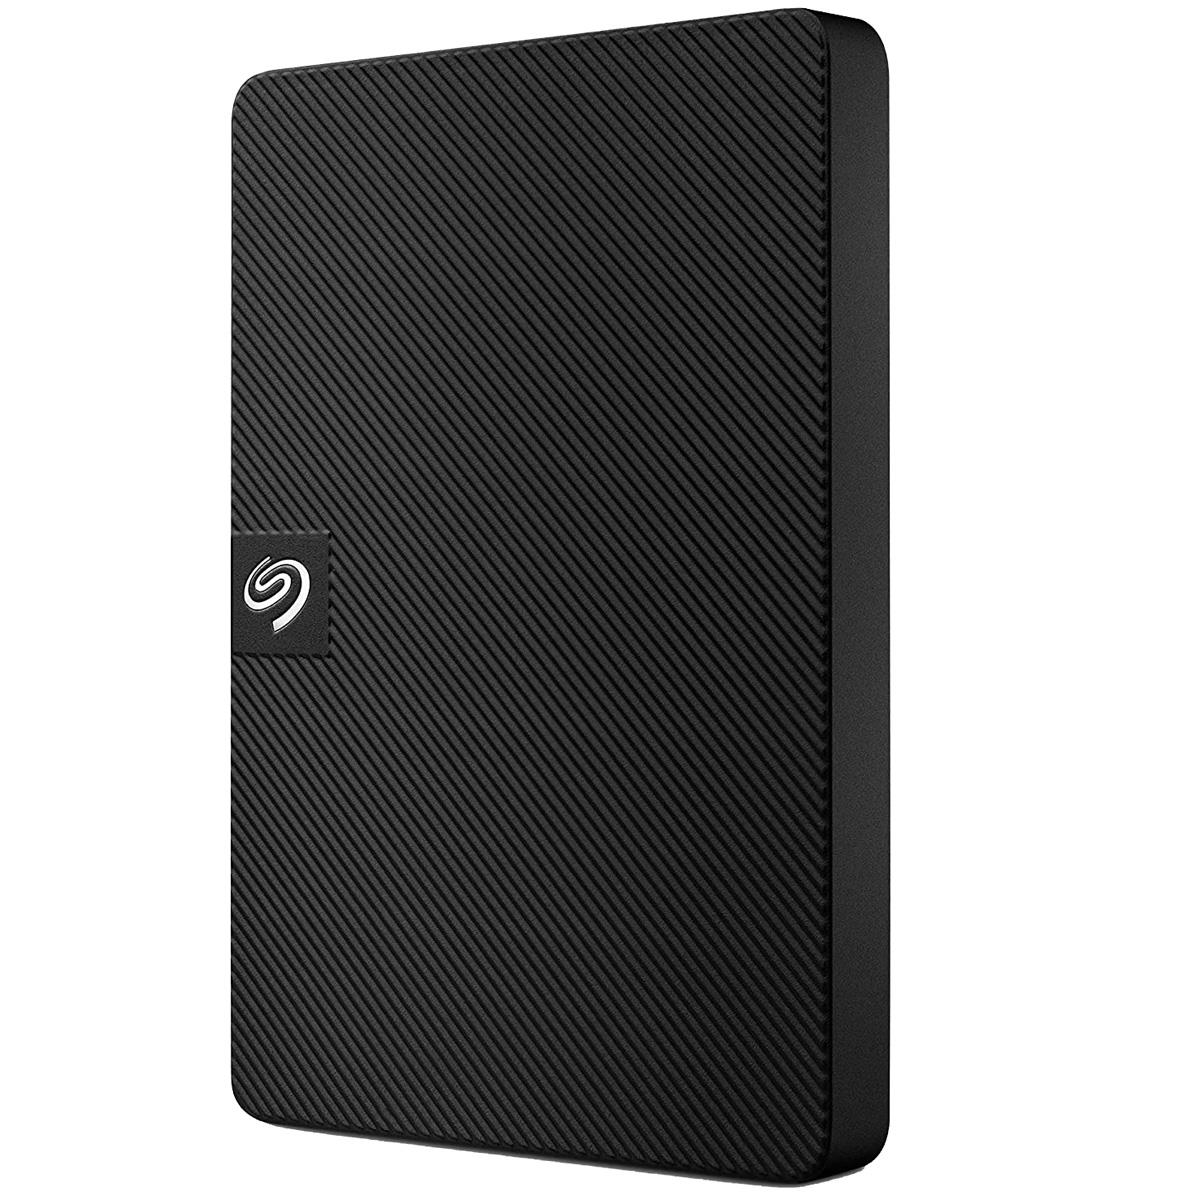 Image of Seagate Expansion 2TB USB 3.0 Portable External Hard Drive